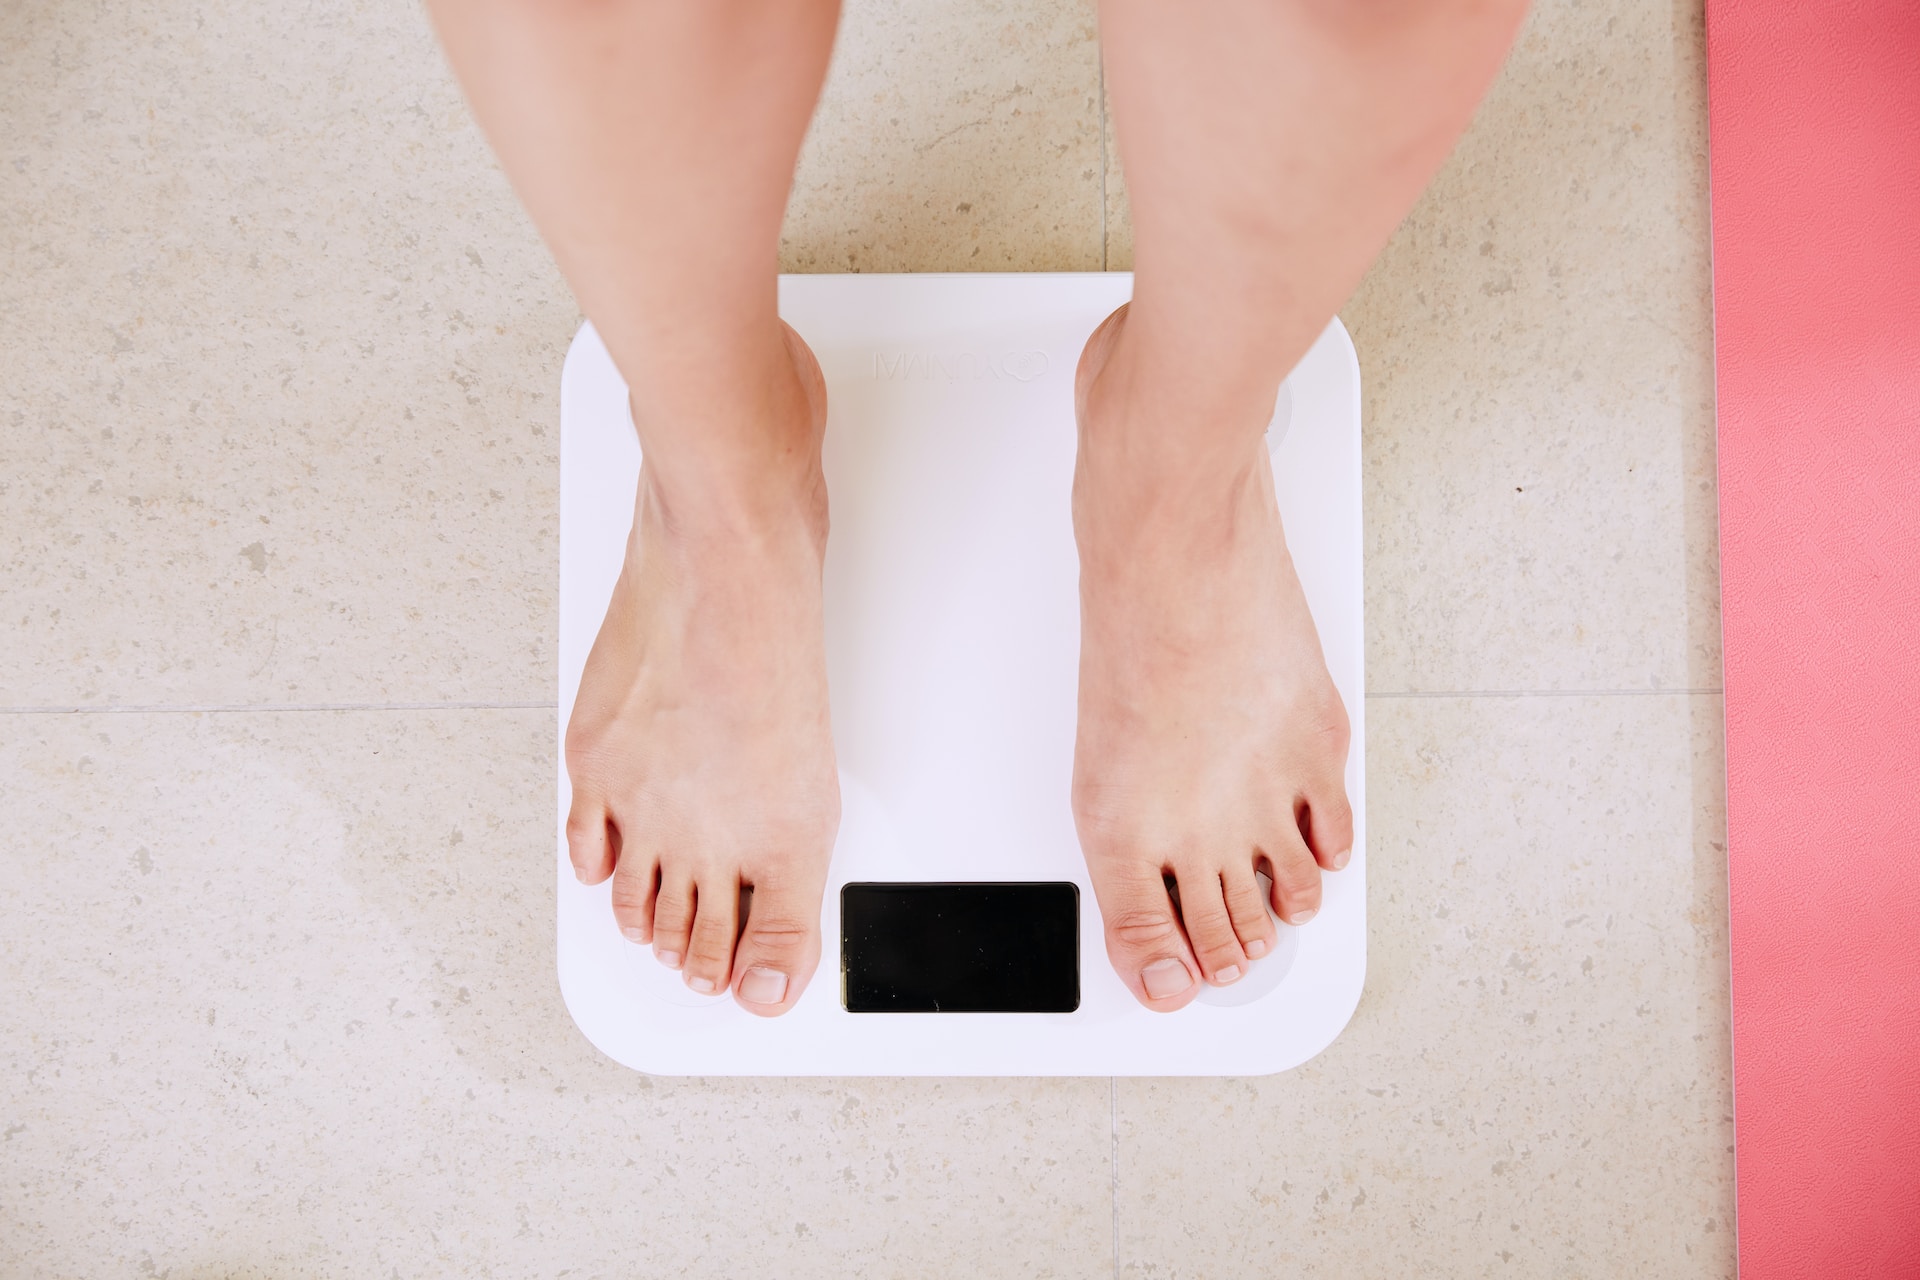 The Risks of Fatphobia to Health and Equity